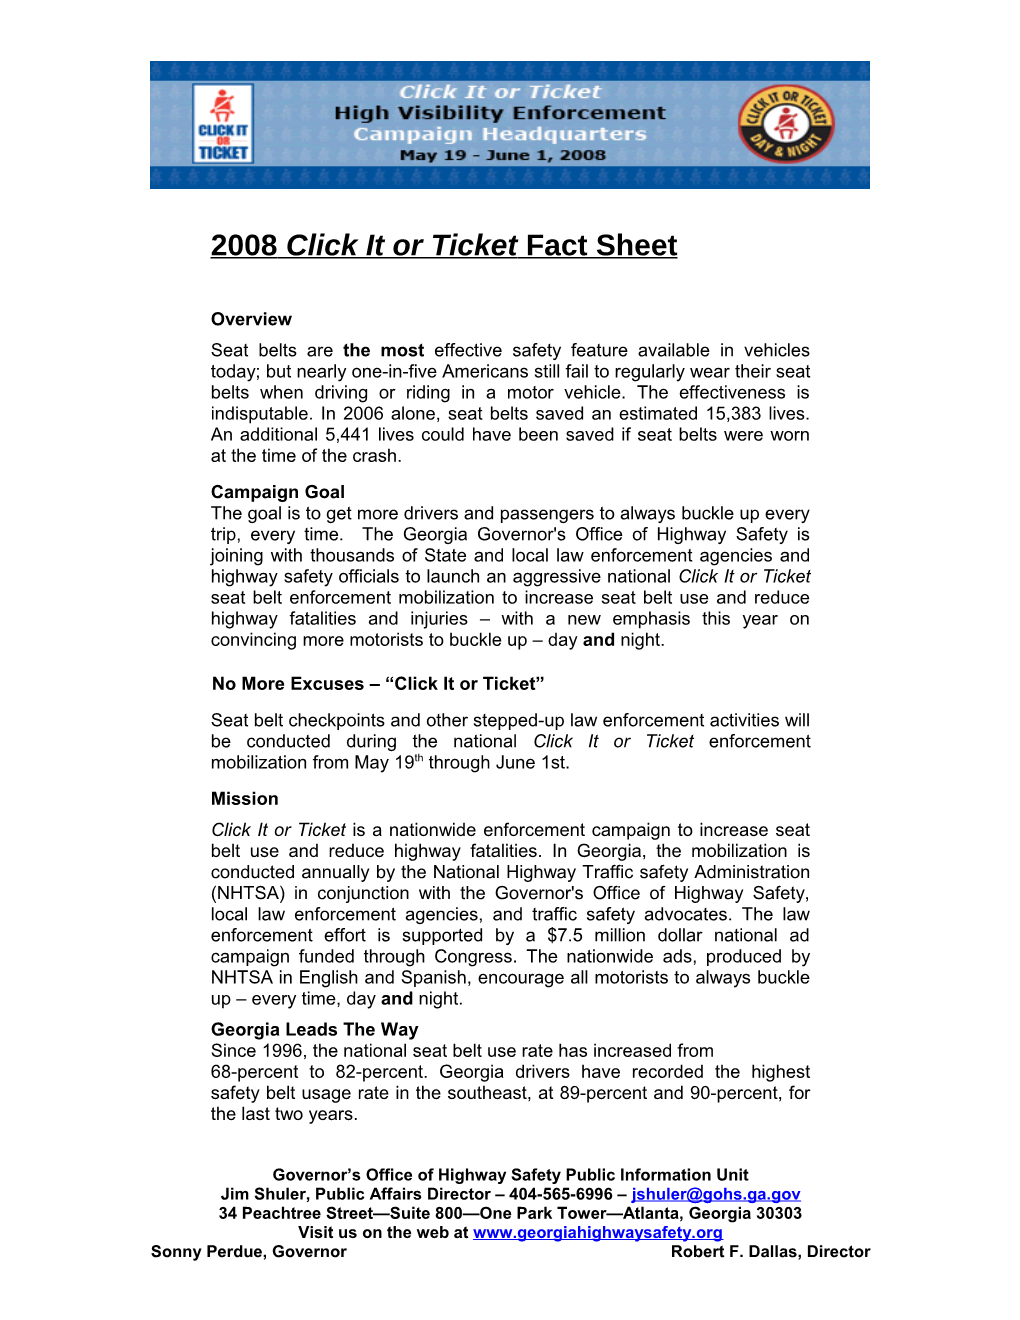 2008Click It Or Ticket Fact Sheet